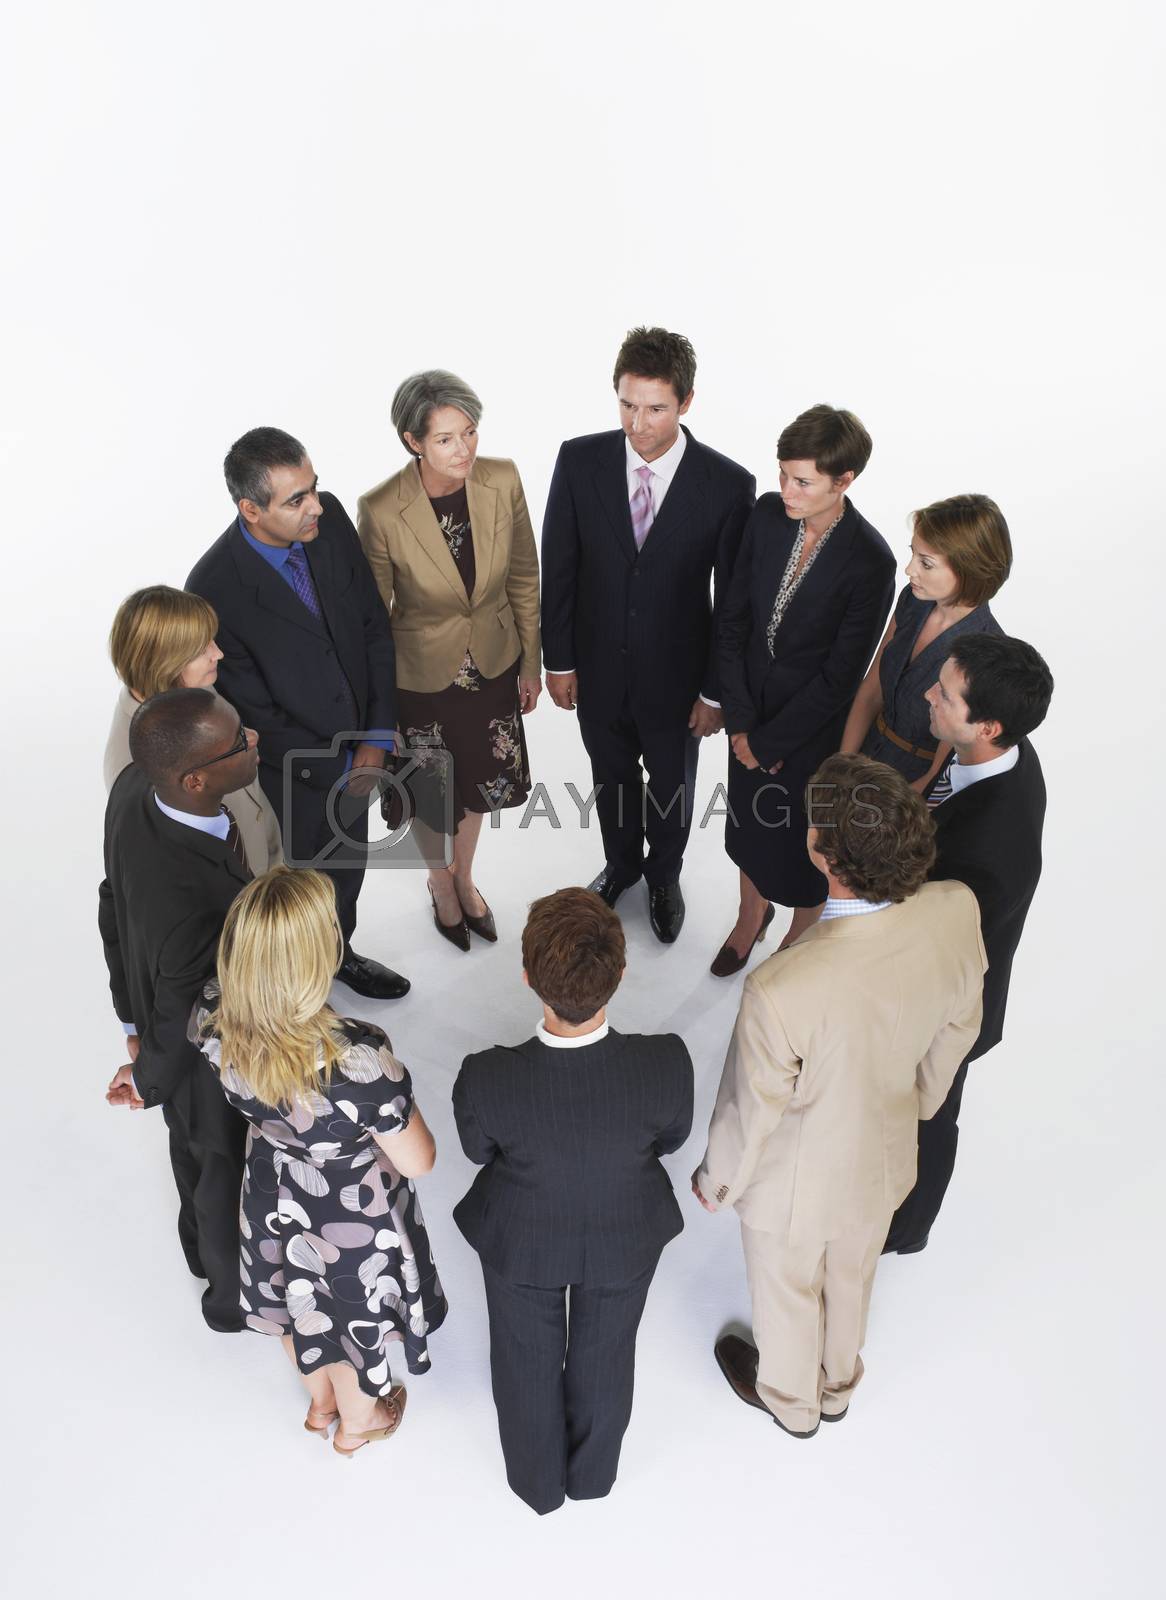 Royalty free image of Group of Businesspeople in a circle by moodboard